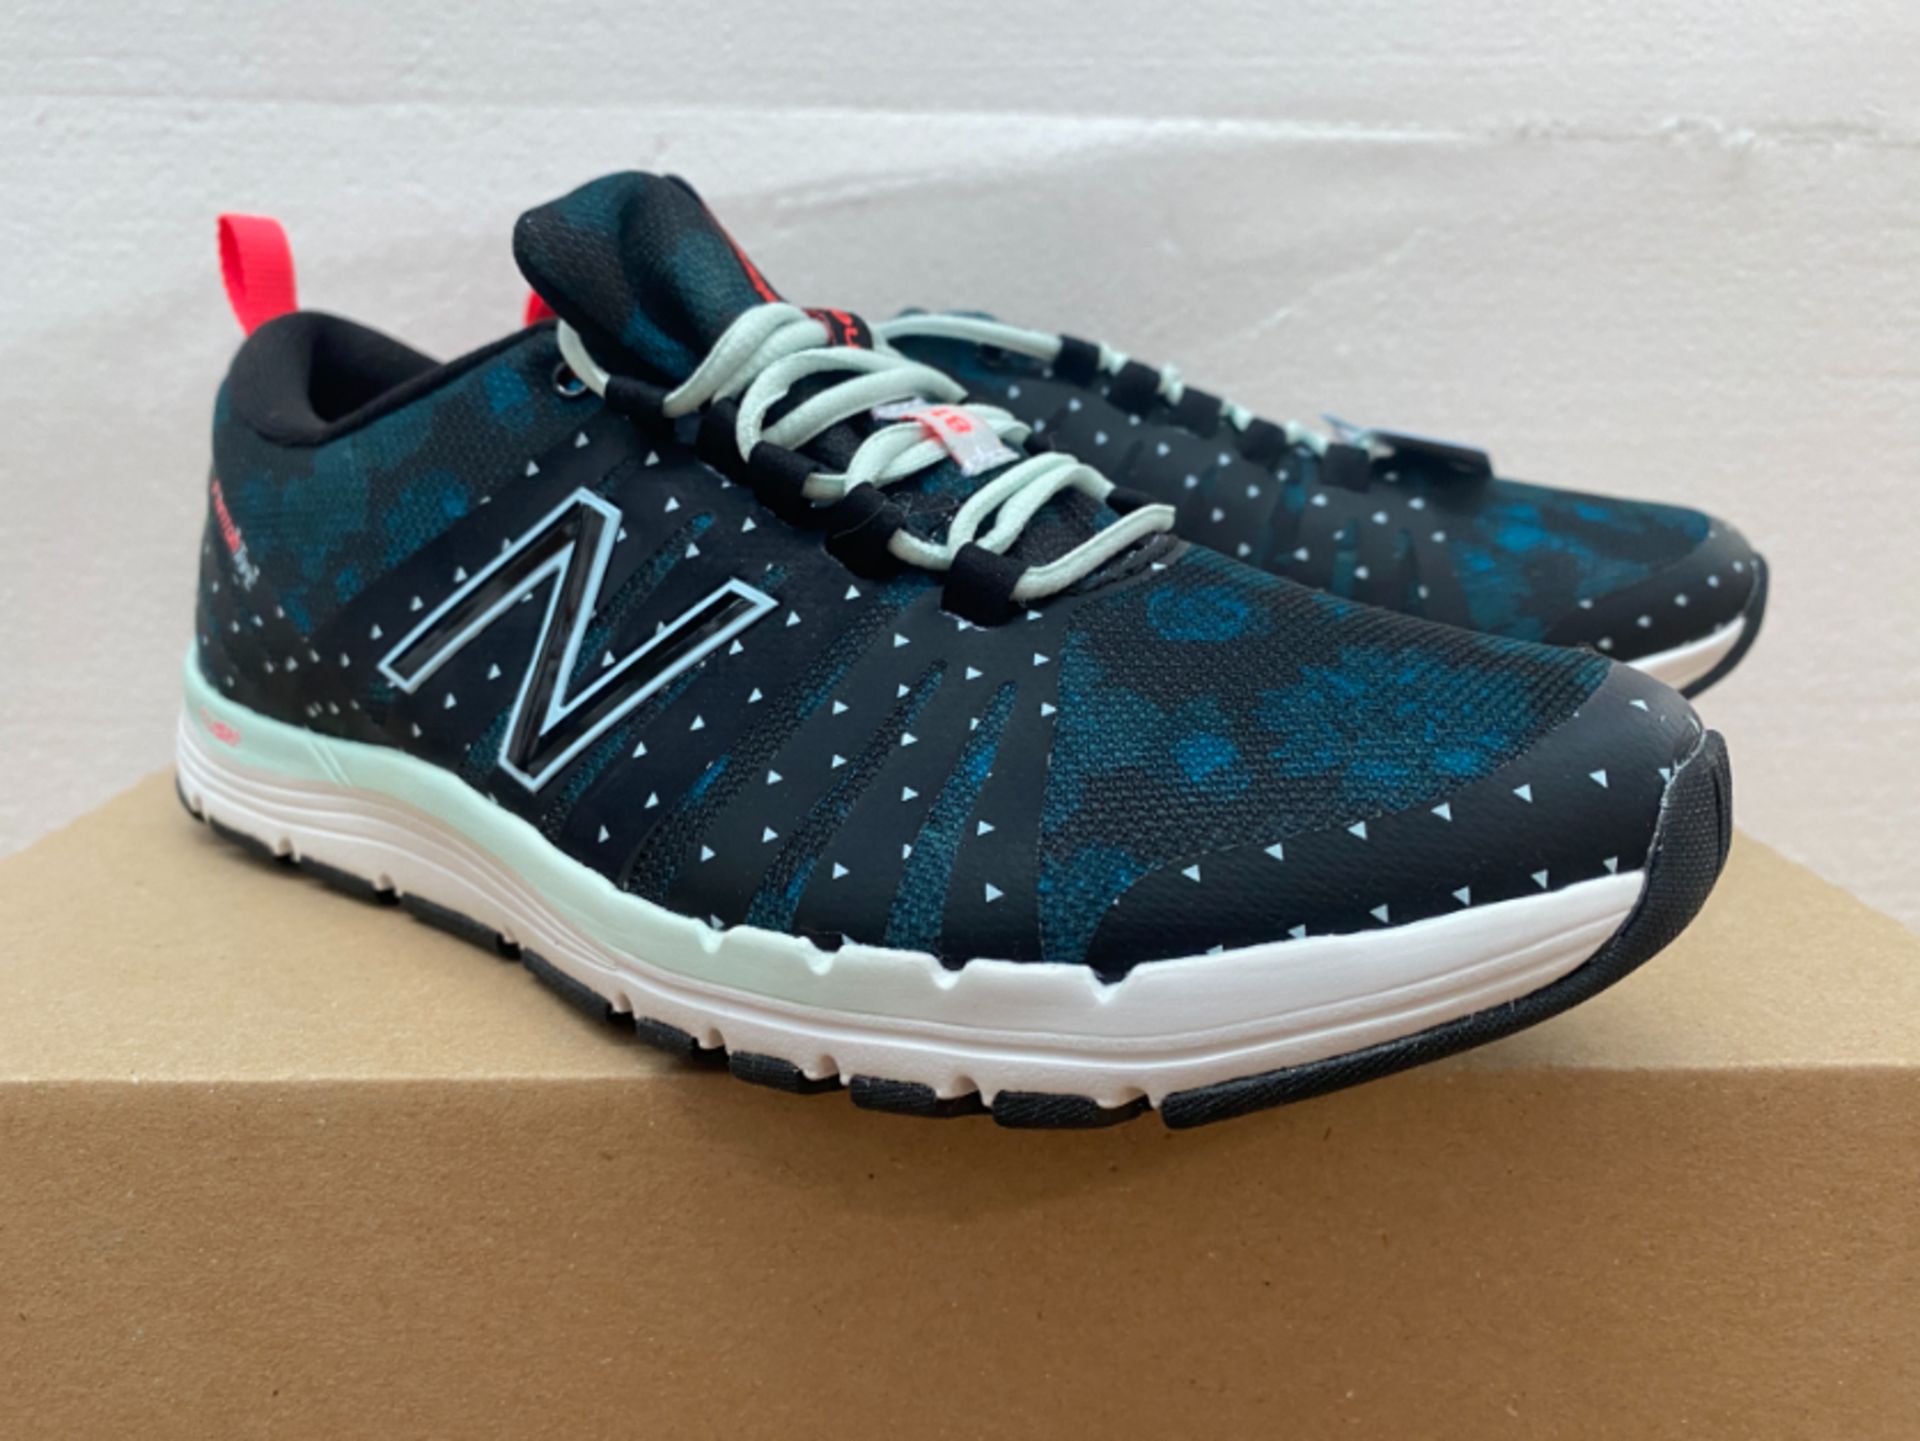 1 LOT TO CONTAIN AN AS NEW BOXED PAIR OF NEW BALANCE UK SIZE 6 811 RUNNING TRAINER IN BLACK AND BLUE